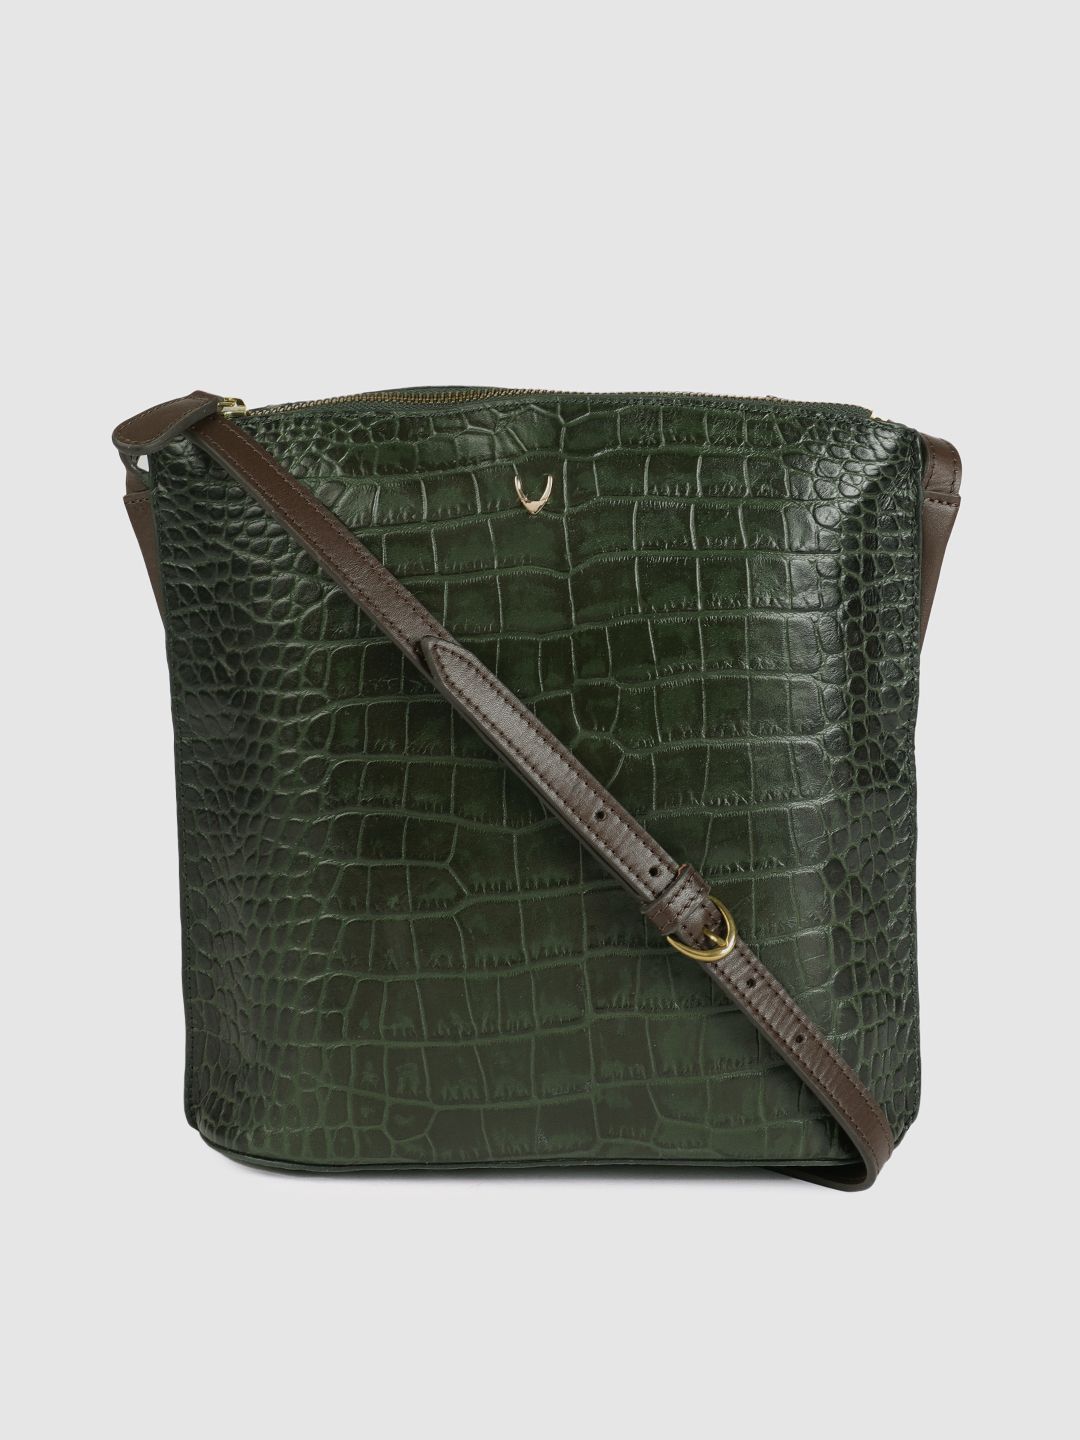 Hidesign Green Textured EE SCORPIO 03 Leather Sling Bag Price in India